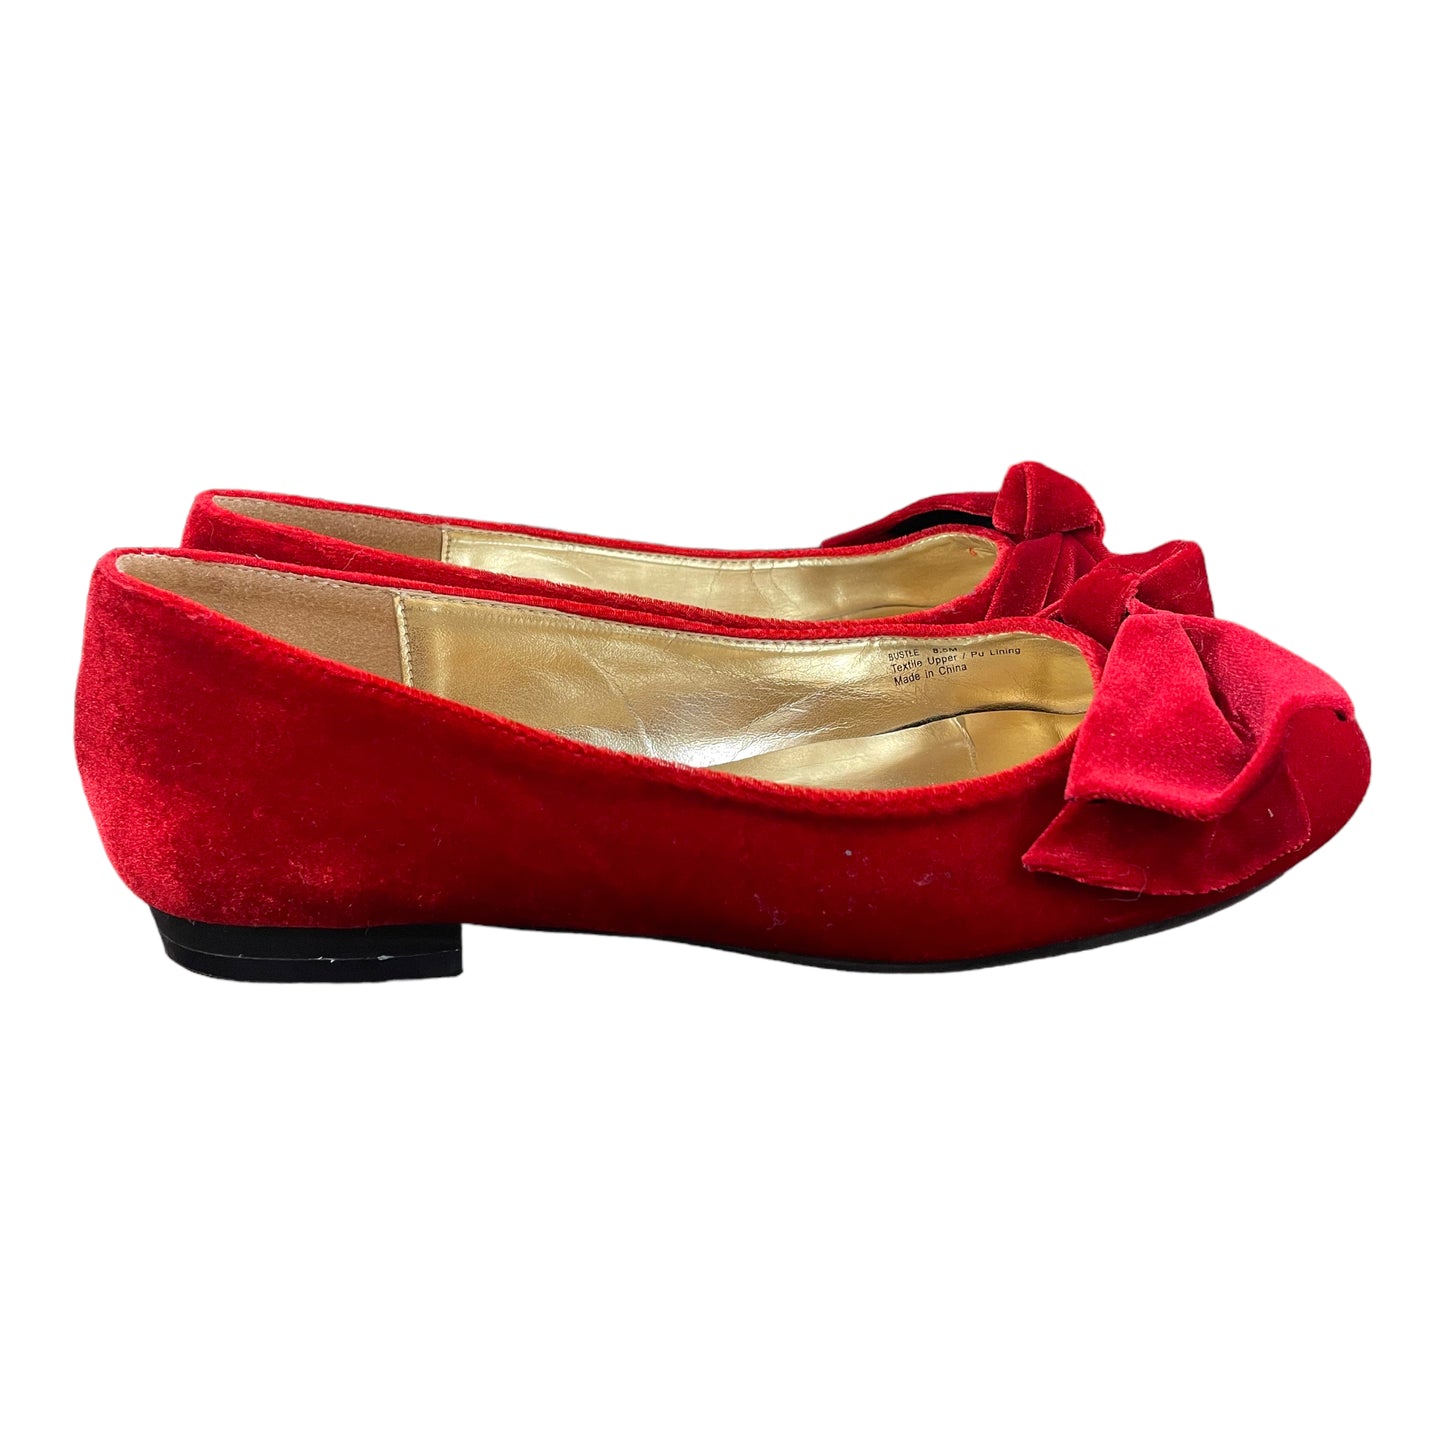 Shoes Flats Ballet By Bellini  Size: 8.5